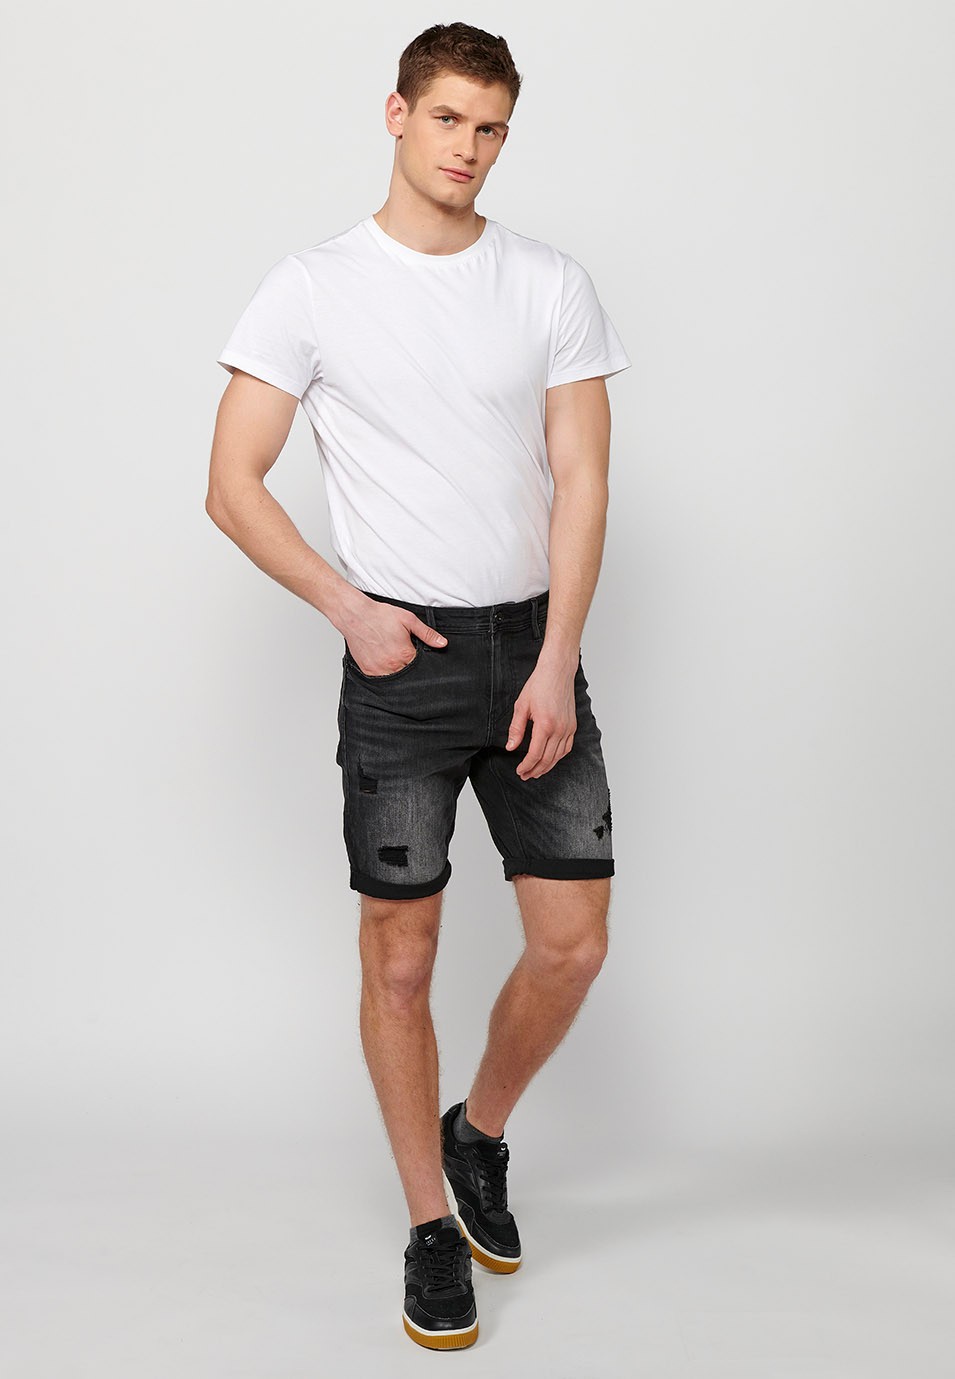 Black Denim Bermuda Shorts with Turn-Up Finish and Front Zipper and Button Closure for Men